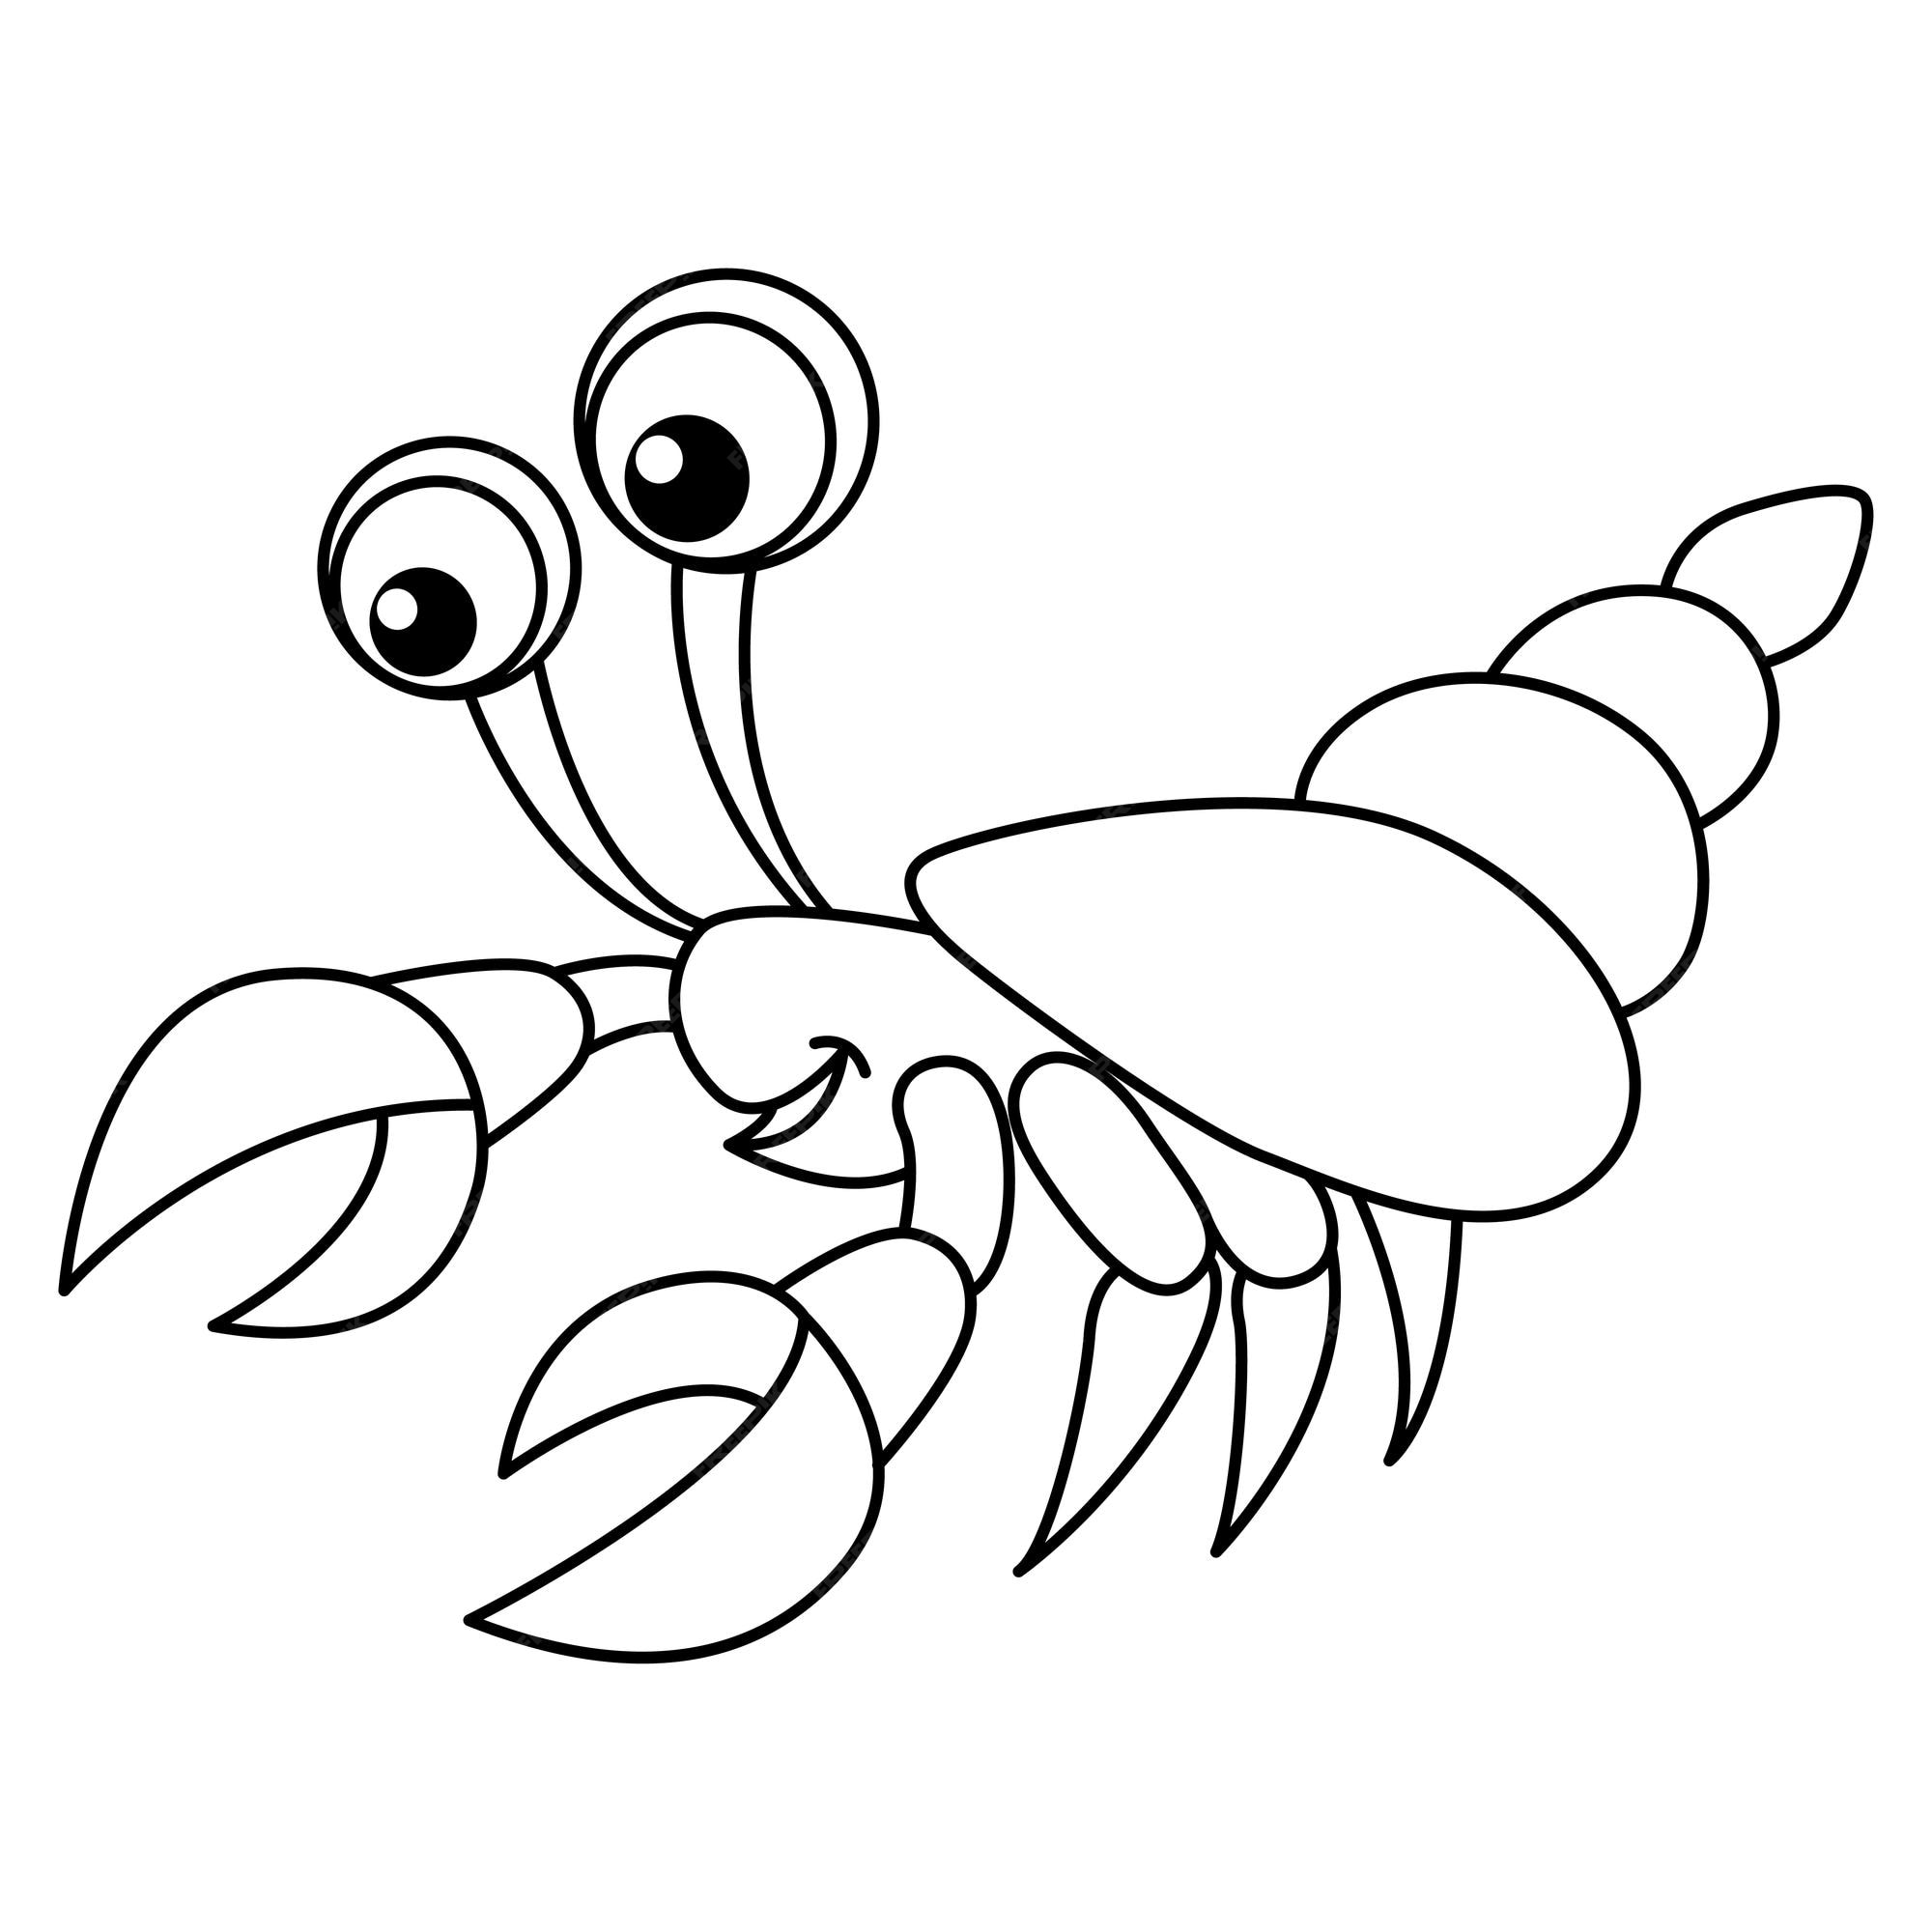 Premium vector cute hermit crab cartoon coloring page illustration vector for kids coloring book